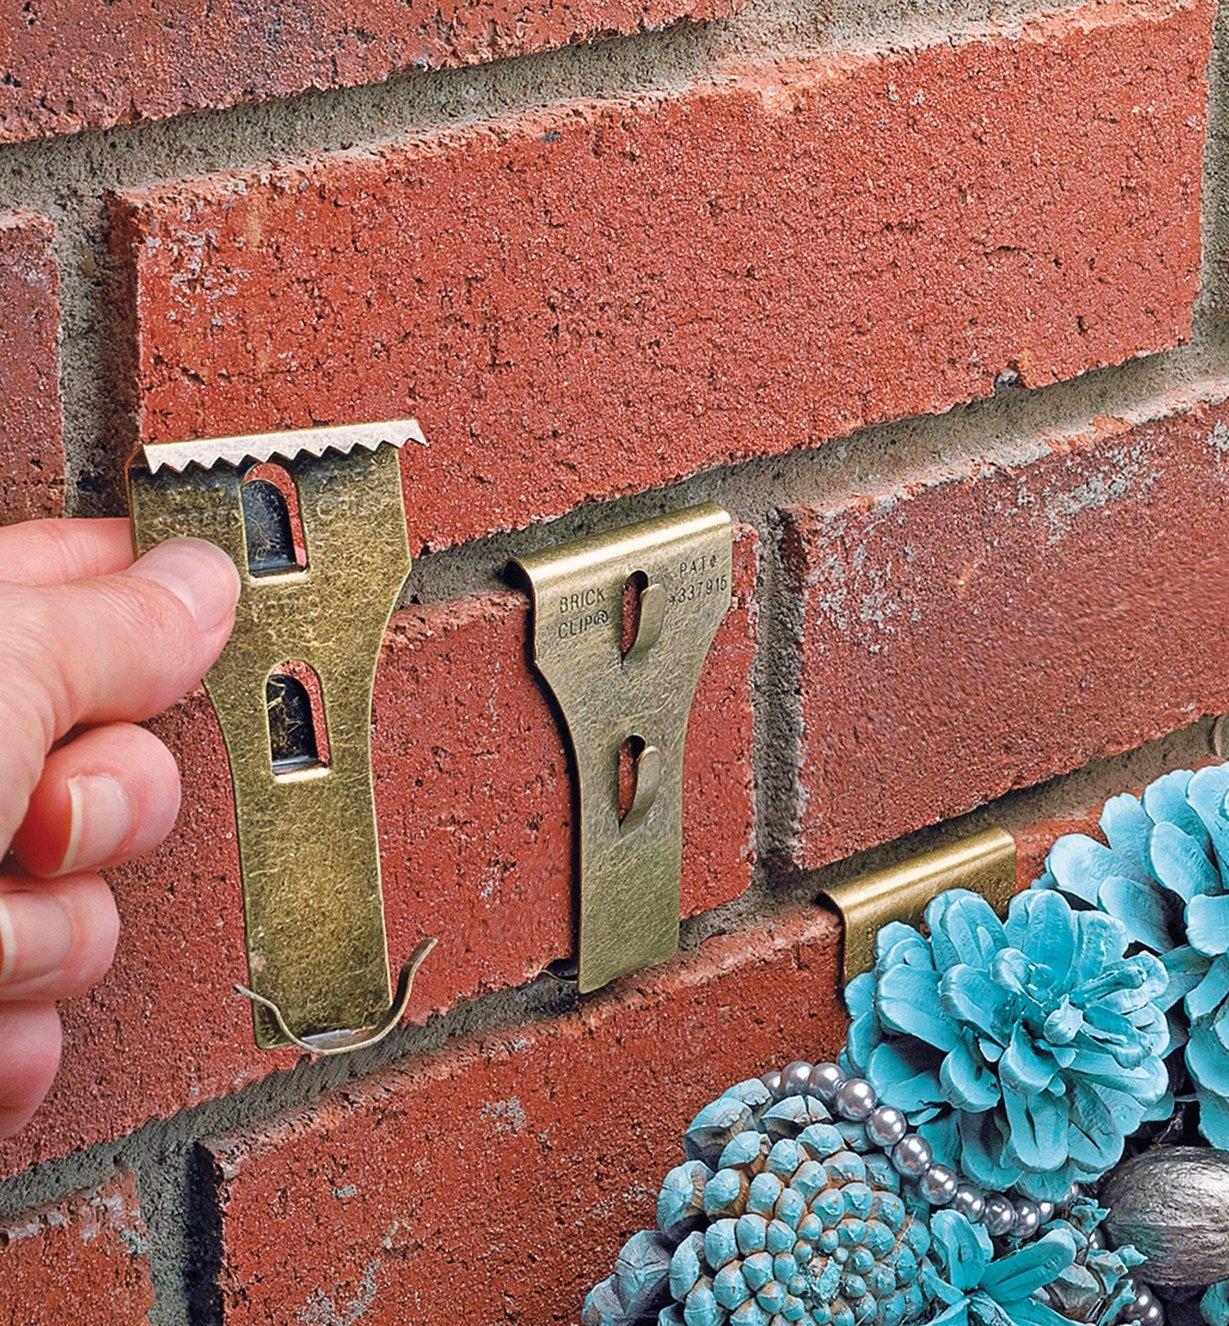 Brick Clip attached to a brick wall